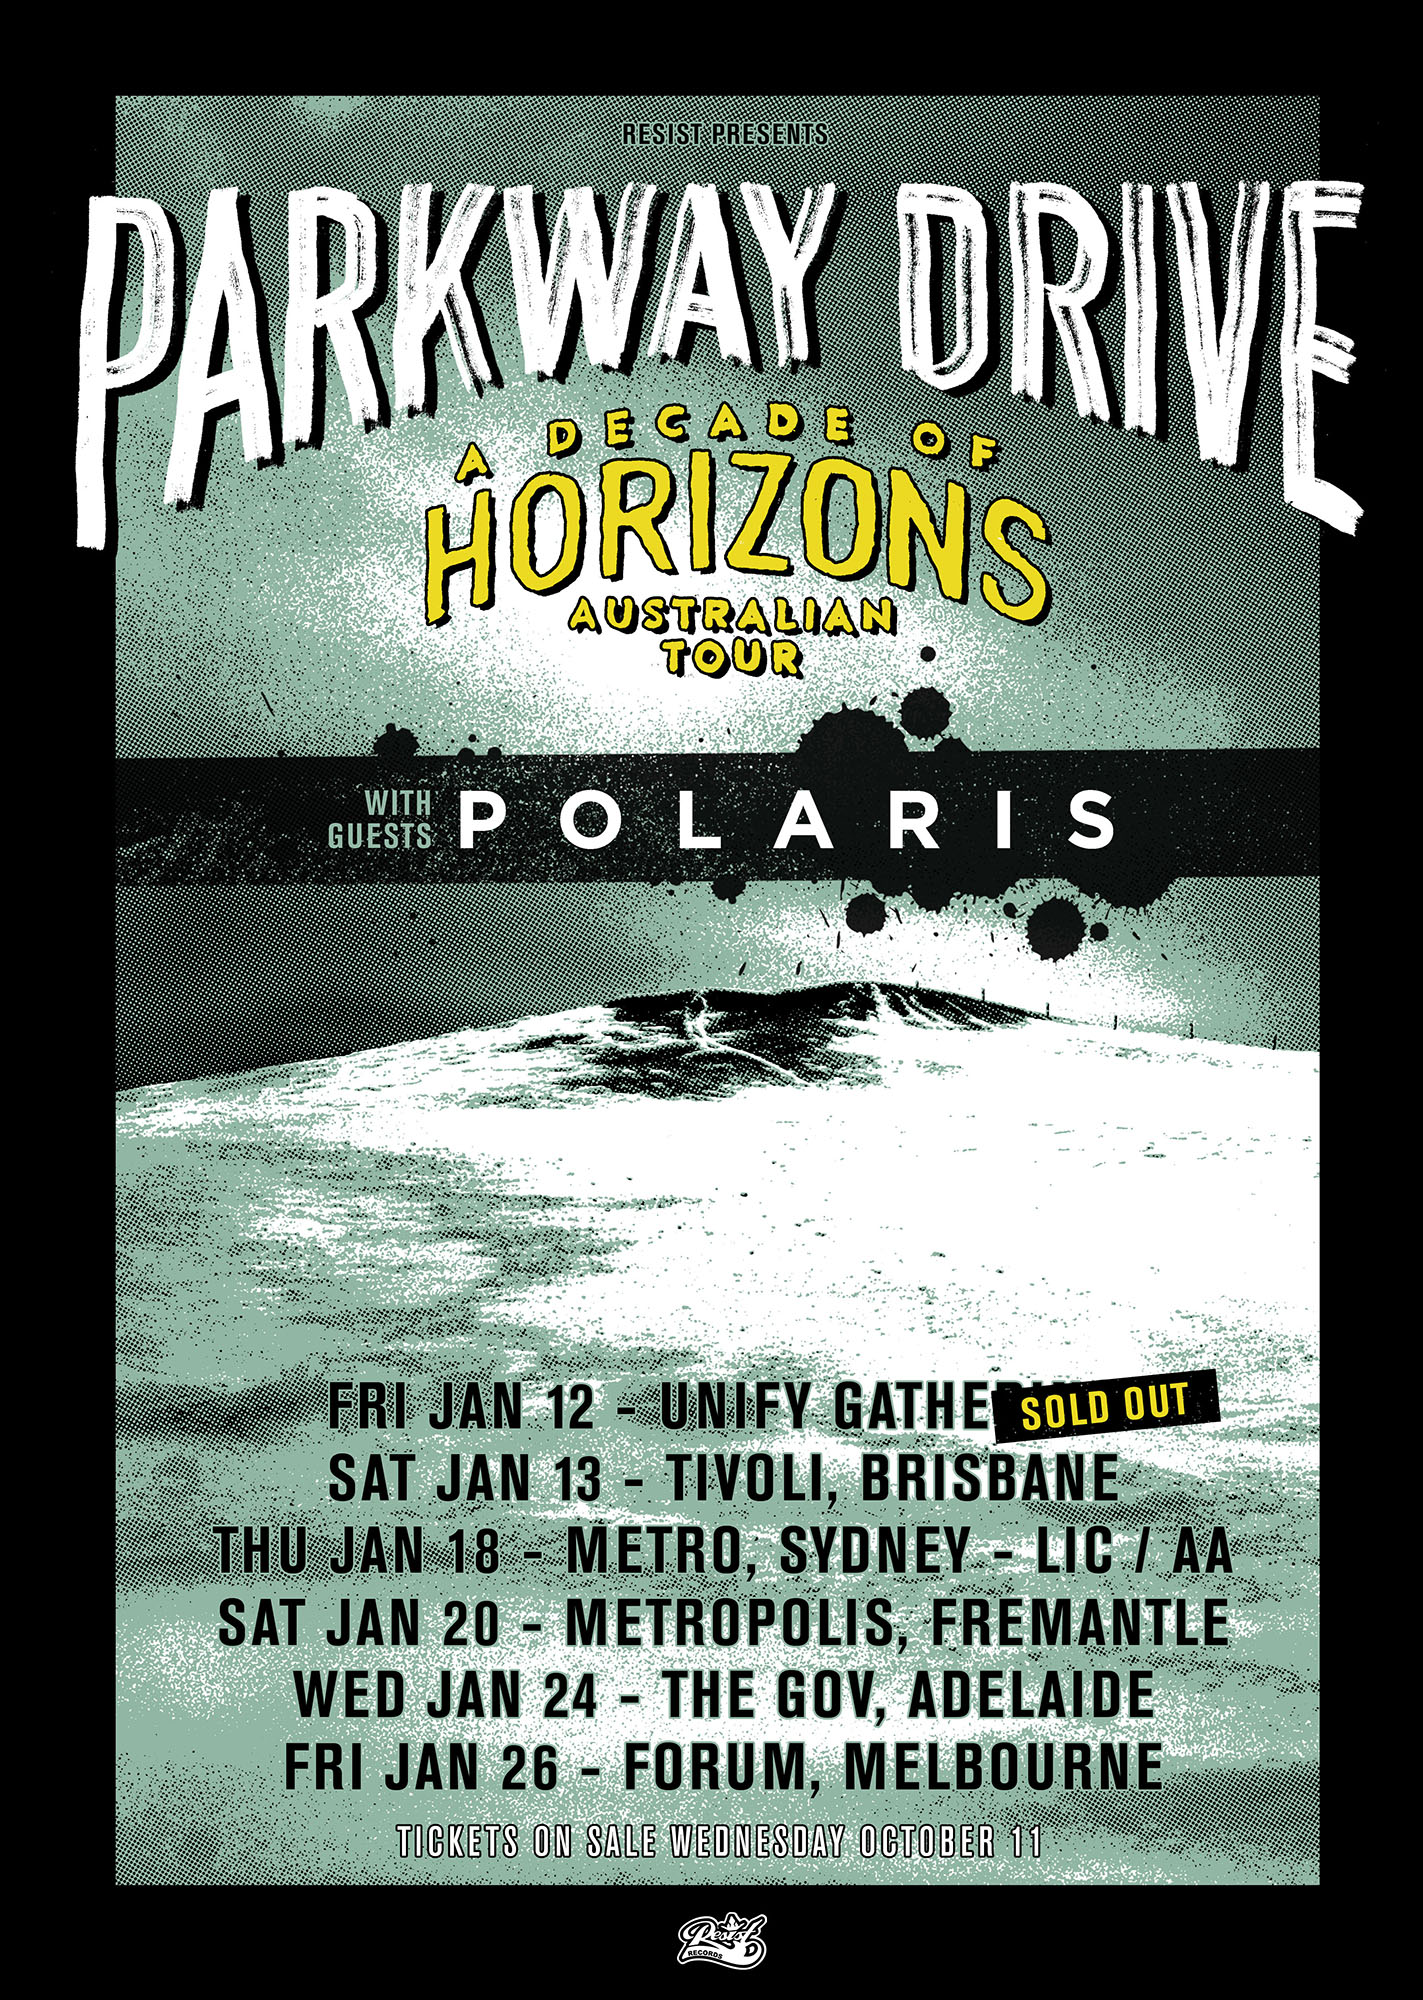 Parkway Drive Announce A Decade Of Horizons Tour